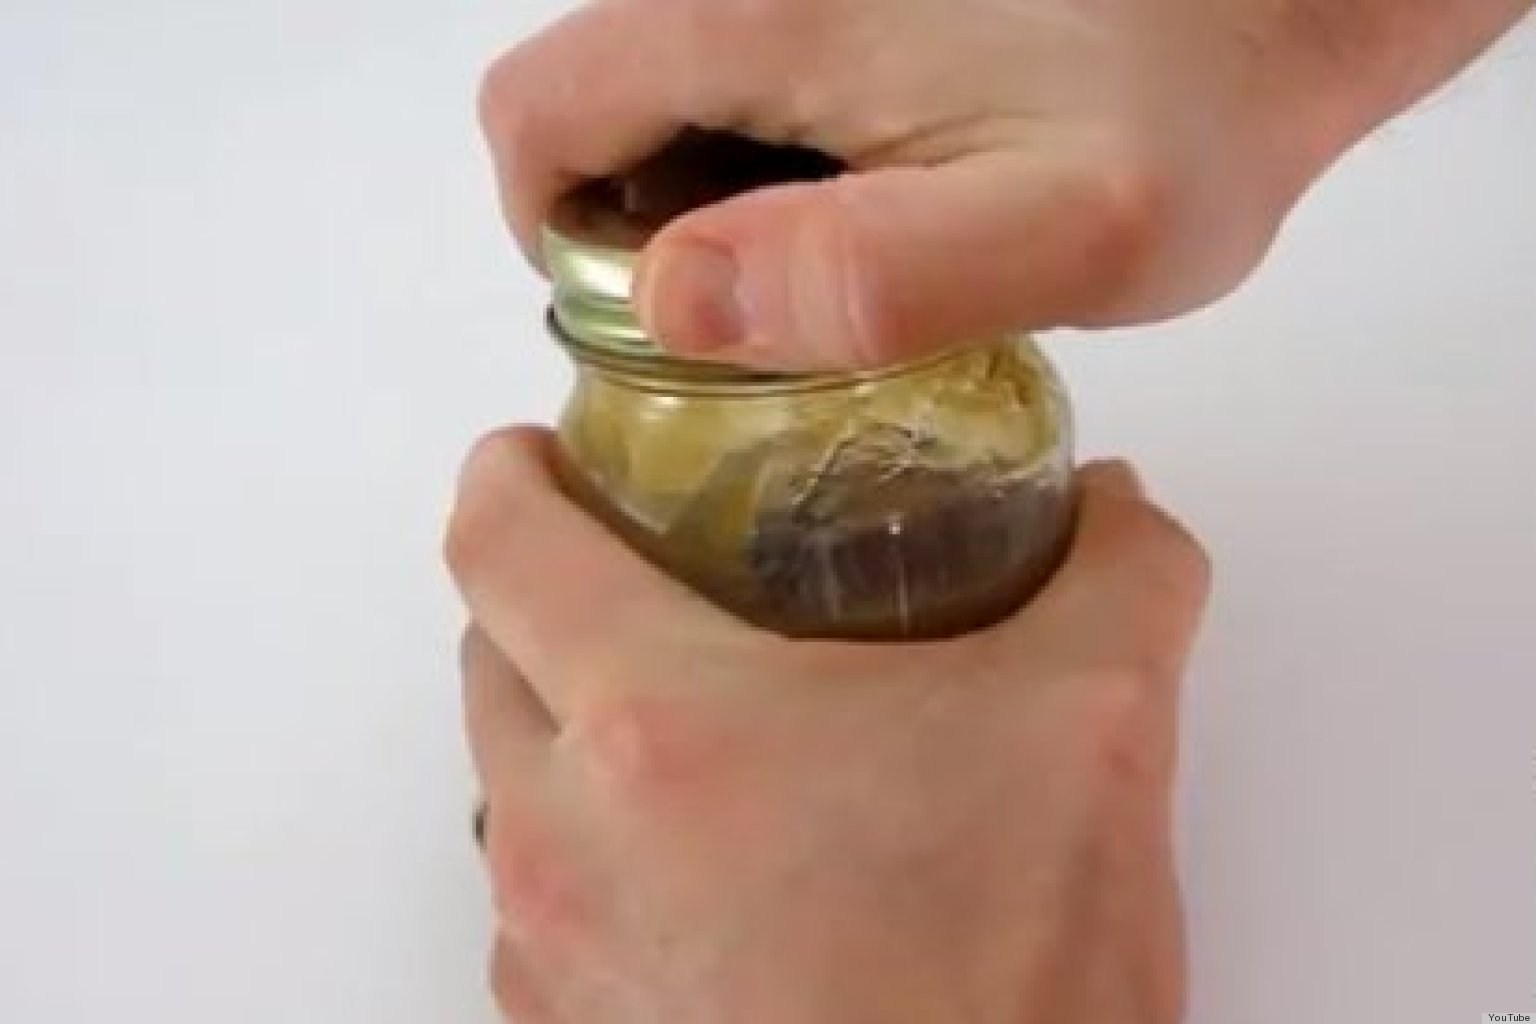 open-a-jar-lid-of-any-size-easily-with-duct-tape-video